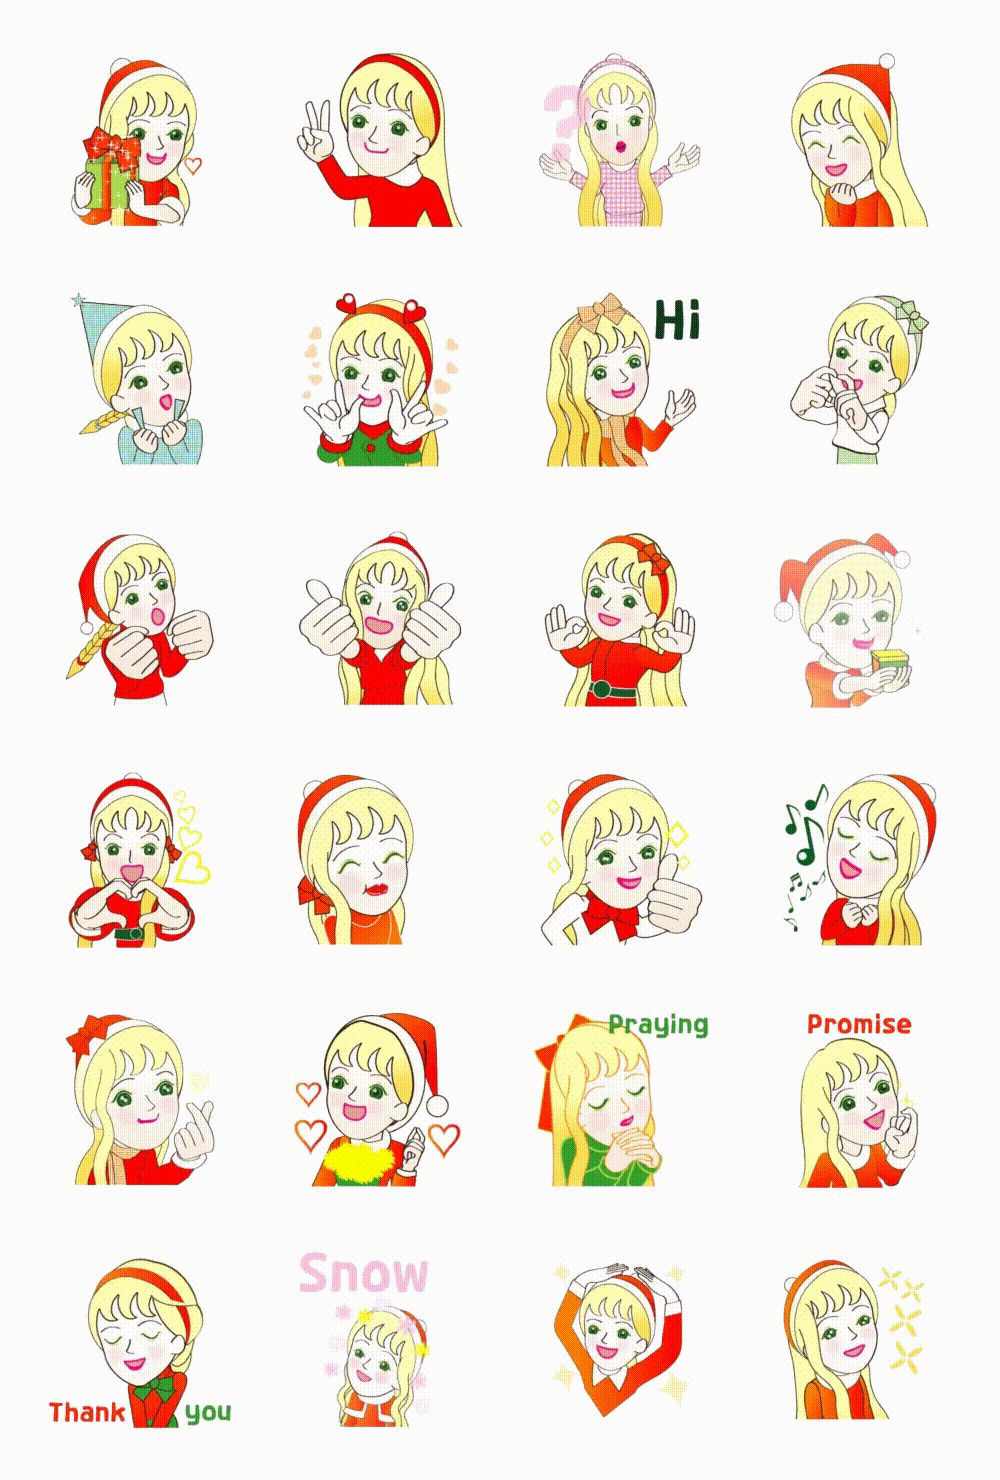 Party! Happy Holiday! Animation/Cartoon,Celebrity,Gag,People,Culture,Christmas,Valentine,New year's day,Birthday,Anniversary,Vacation,Etc sticker pack for Whatsapp, Telegram, Signal, and others chatting and message apps